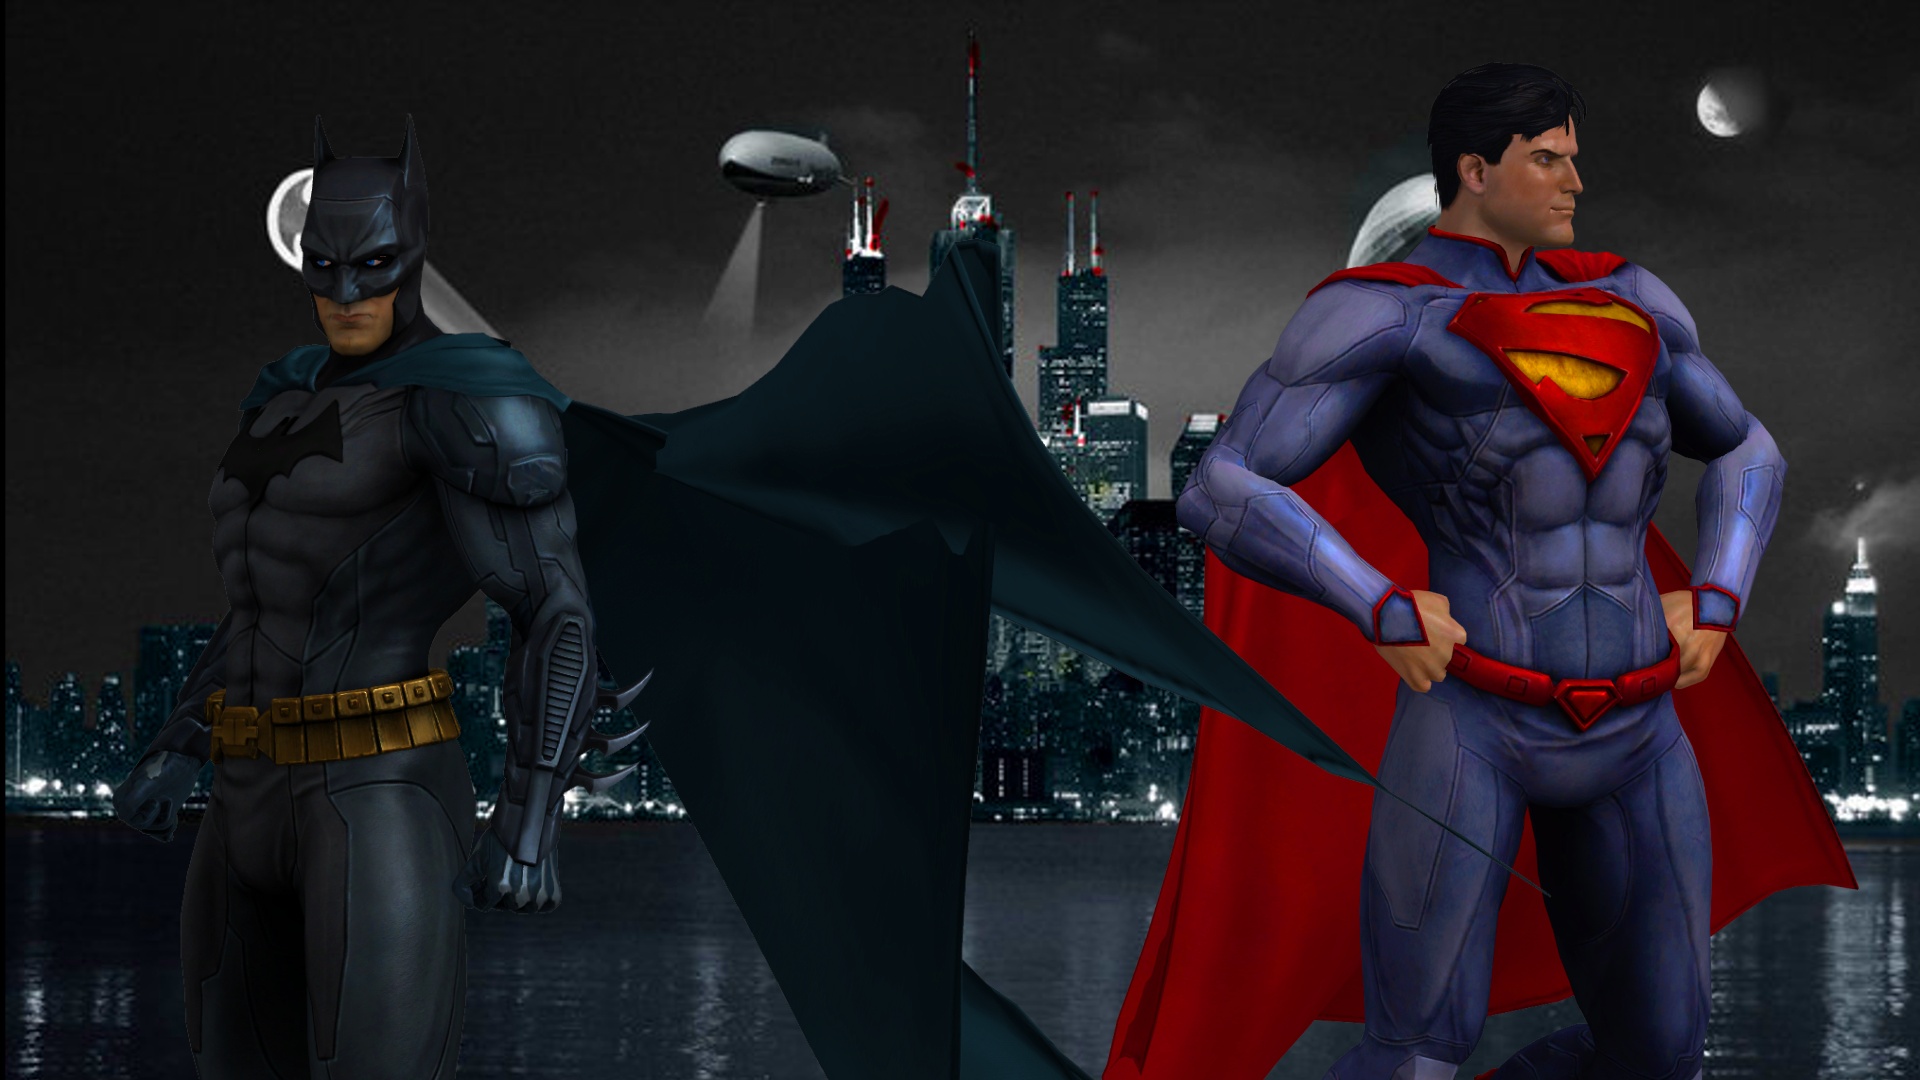 Batman and Superman Wallpaper by LadyLionhart on